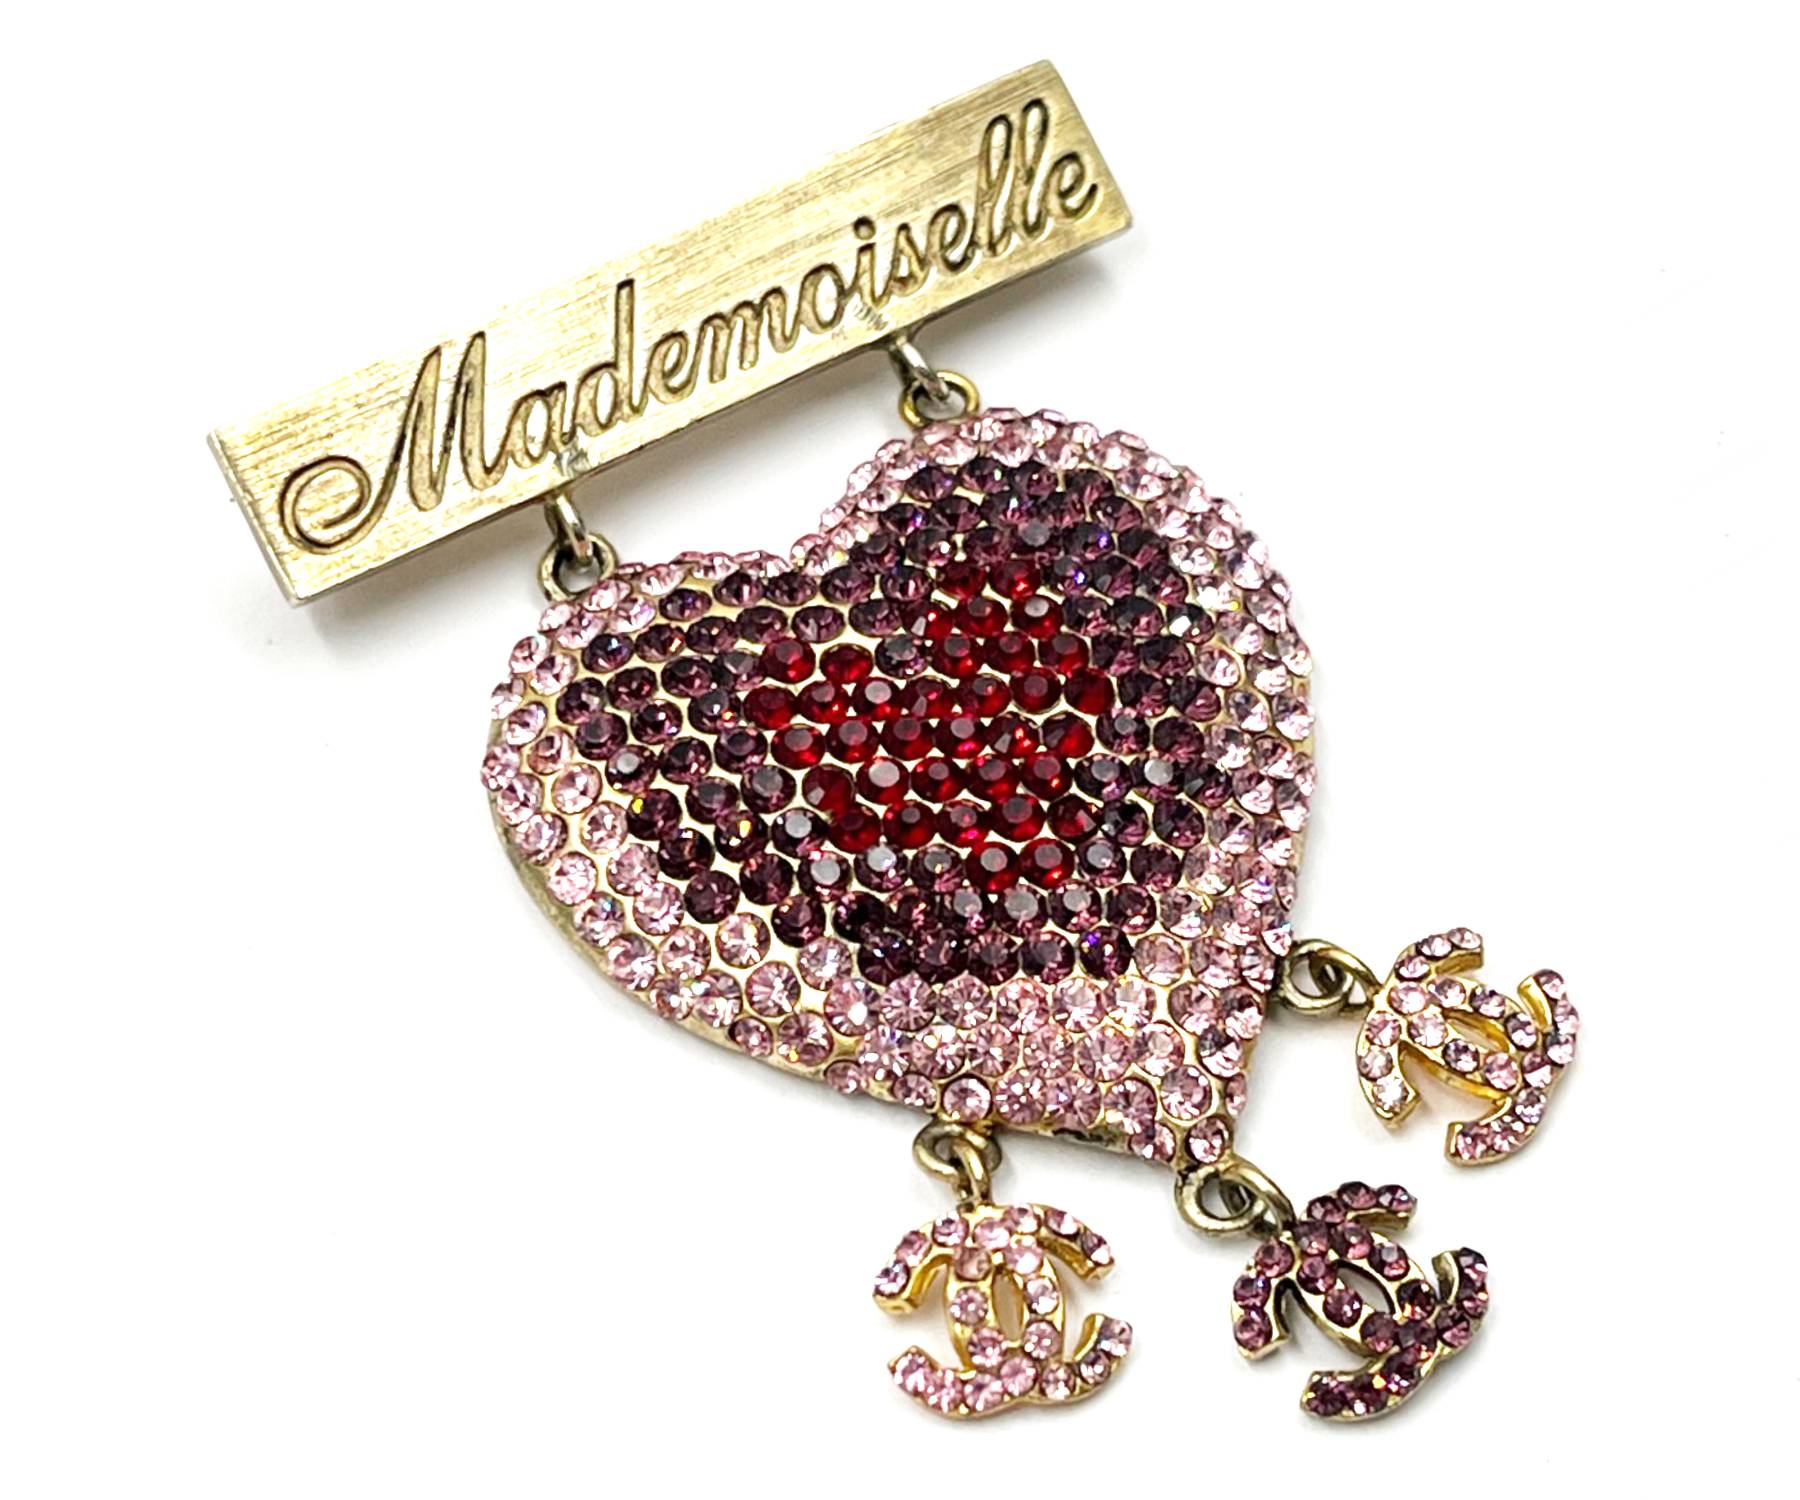 Chanel Vintage Rare Gold Plated Mademoiselle Pink Heart CC Brooch